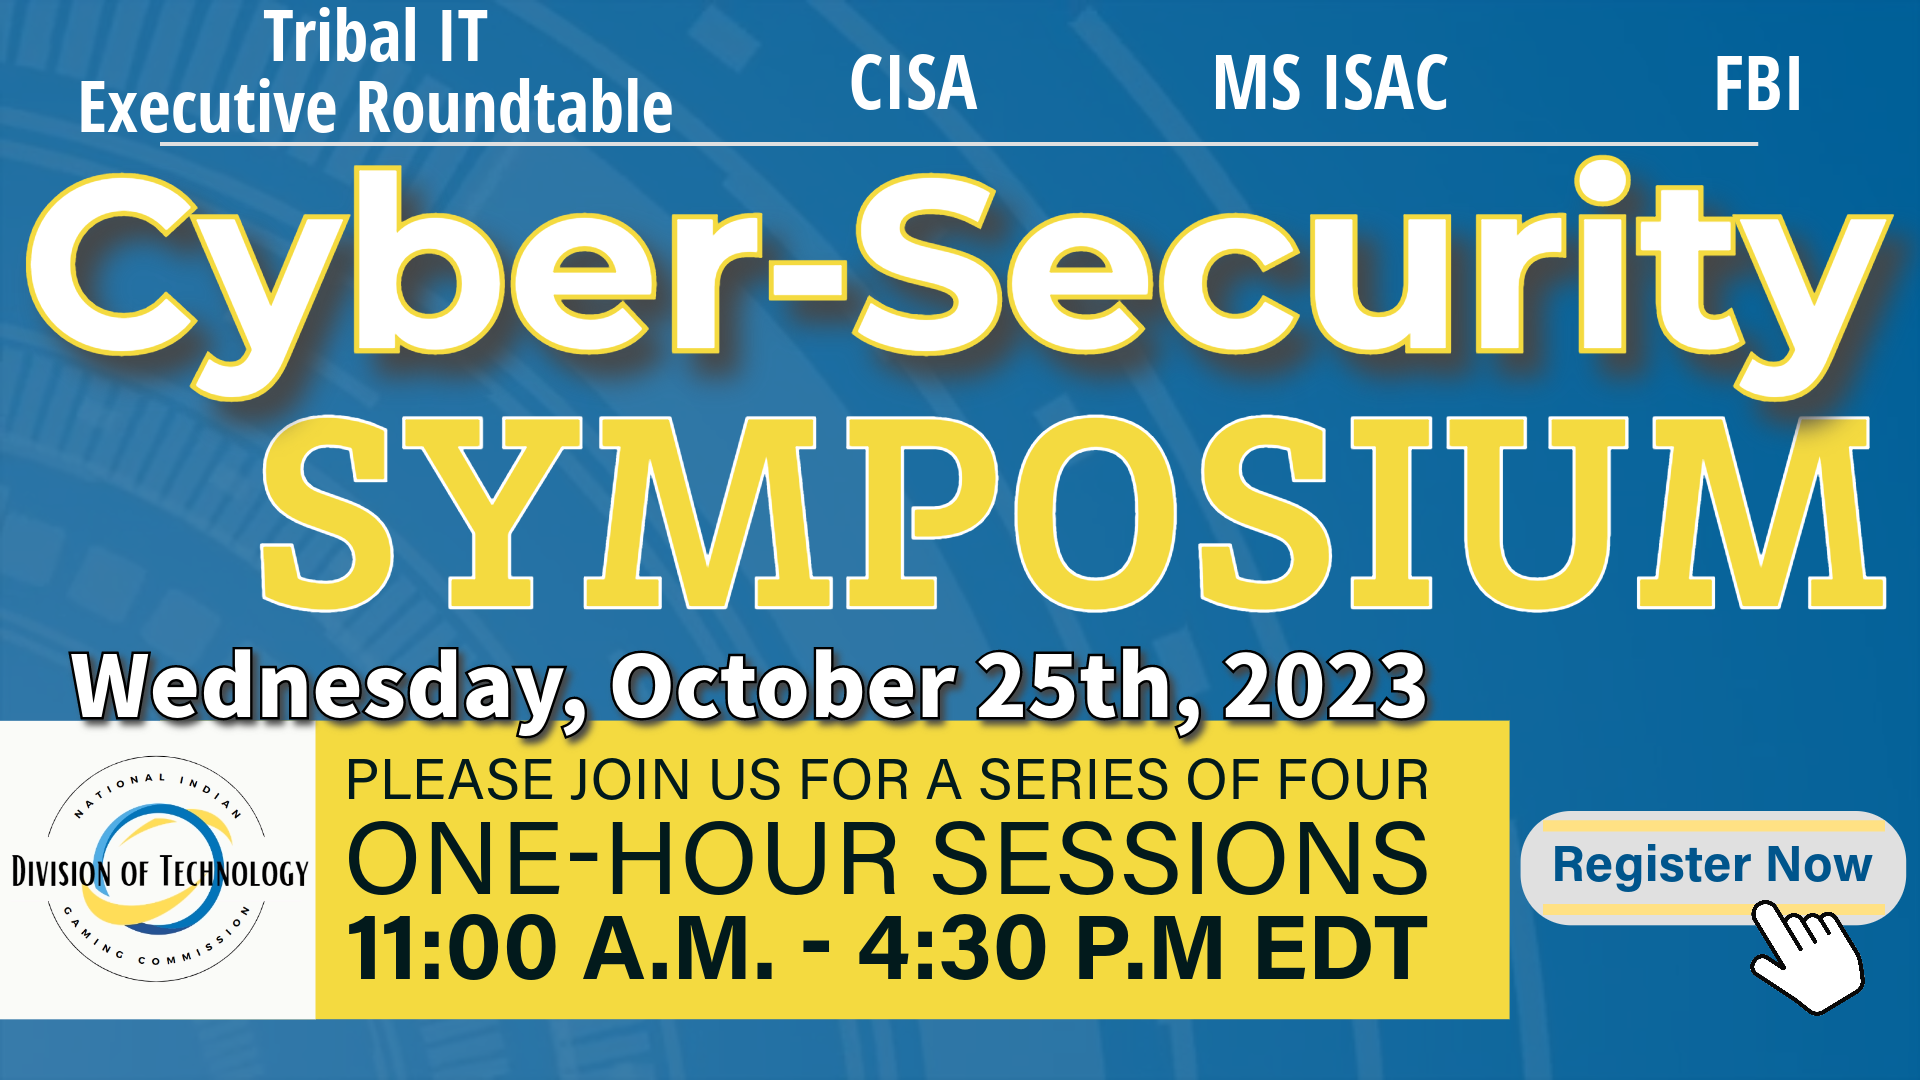 Cyber-Security Symposium Sessions